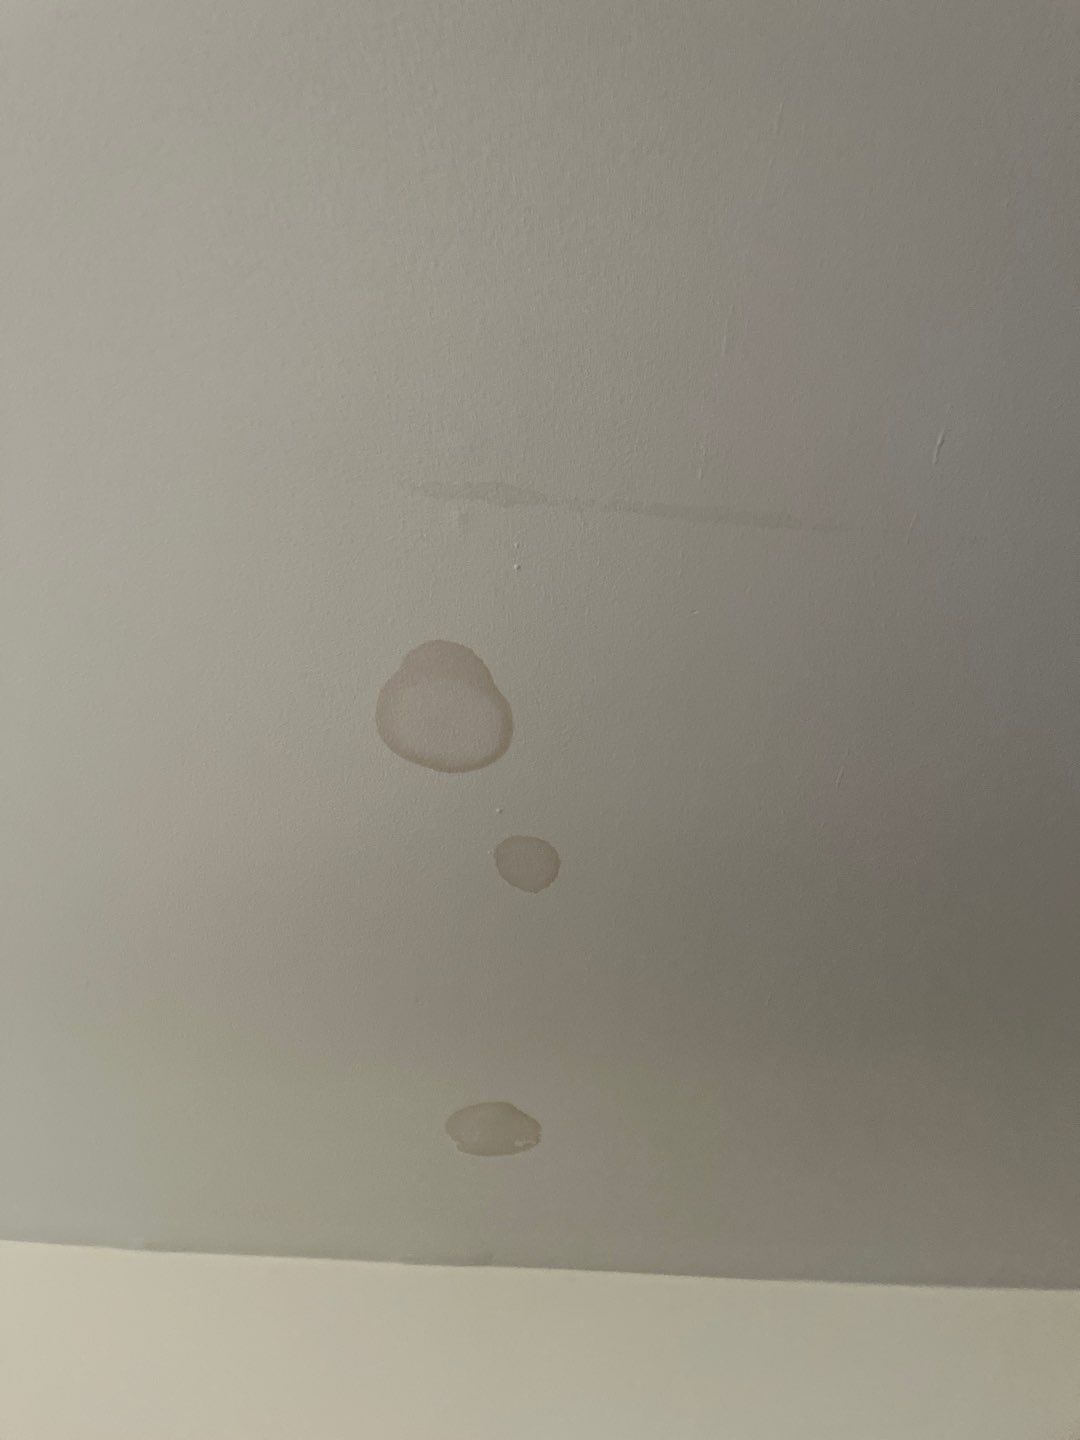 Water Stains on Ceiling?